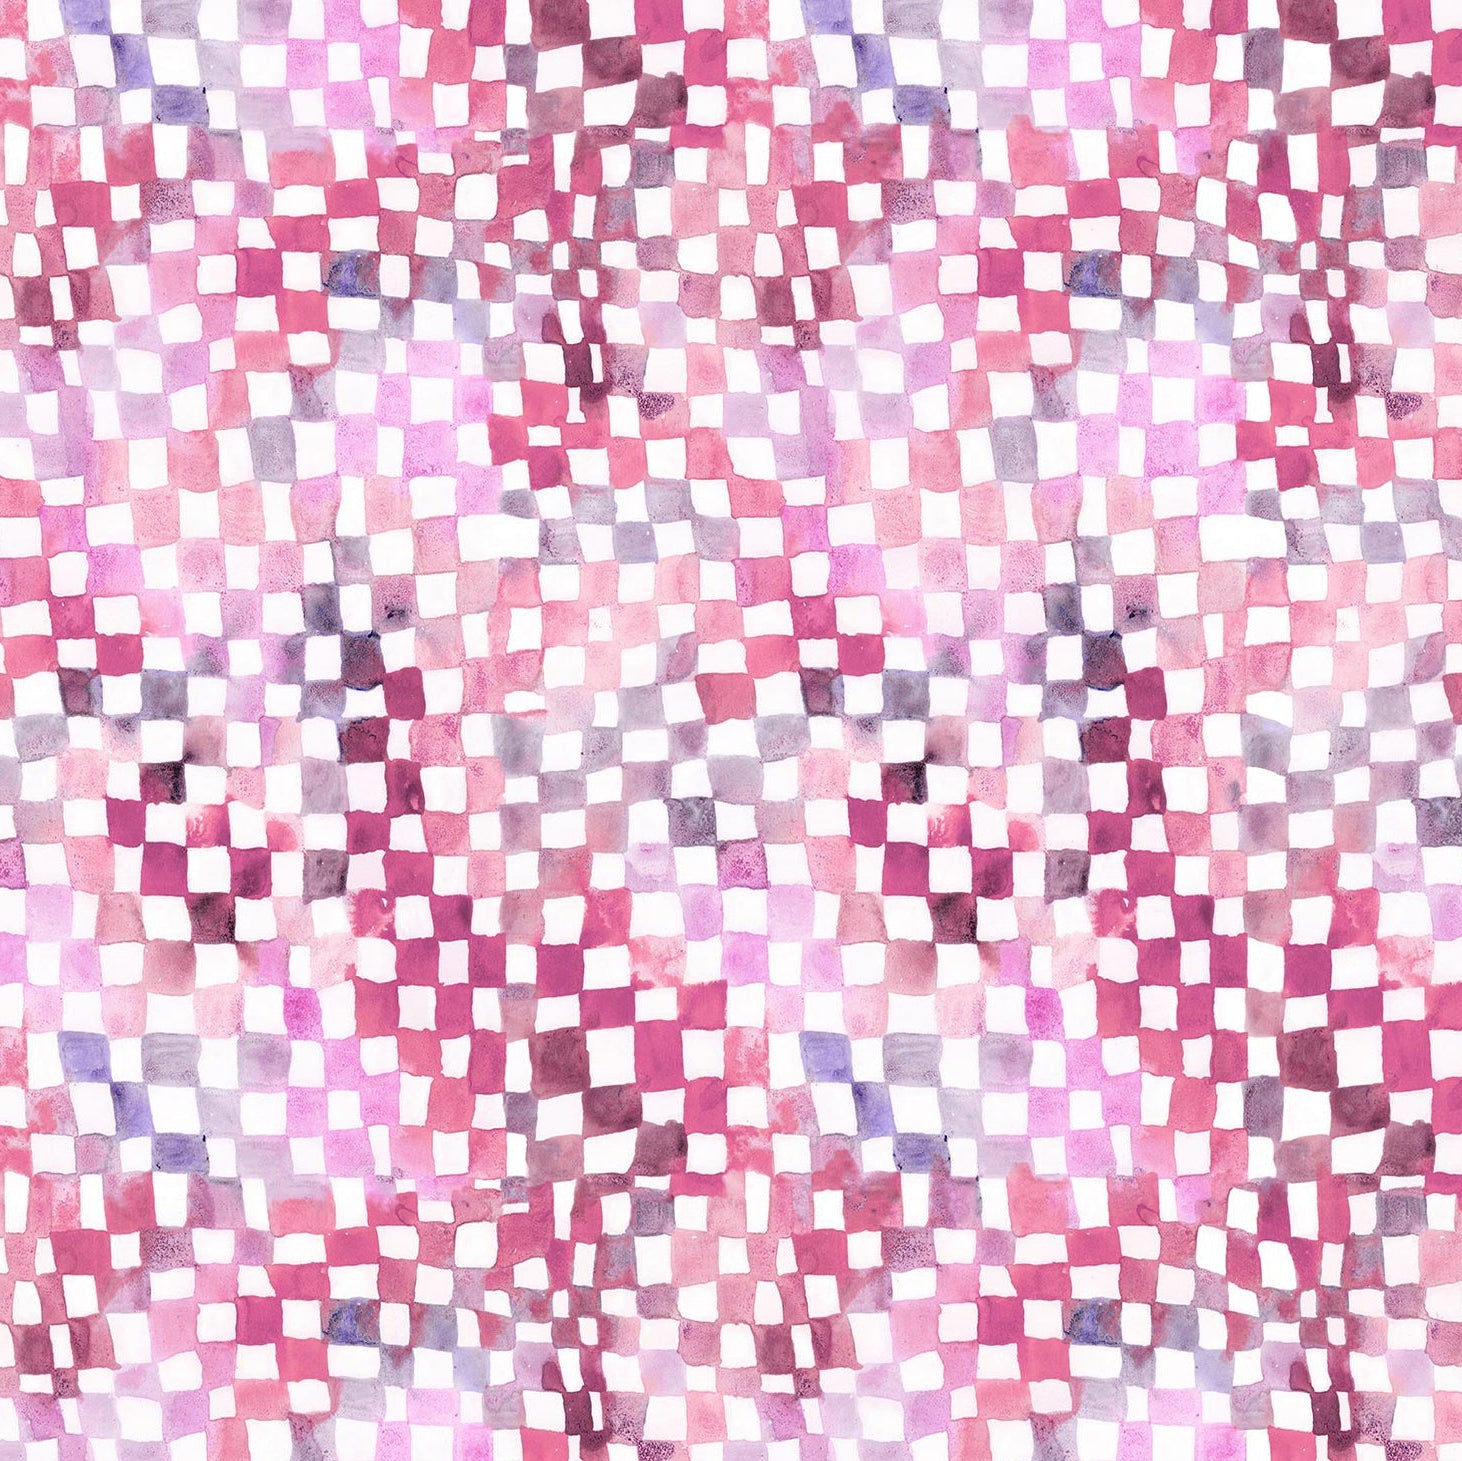 Detail of wallpaper in a painterly chess board print in shade of pink and purple on a white field.